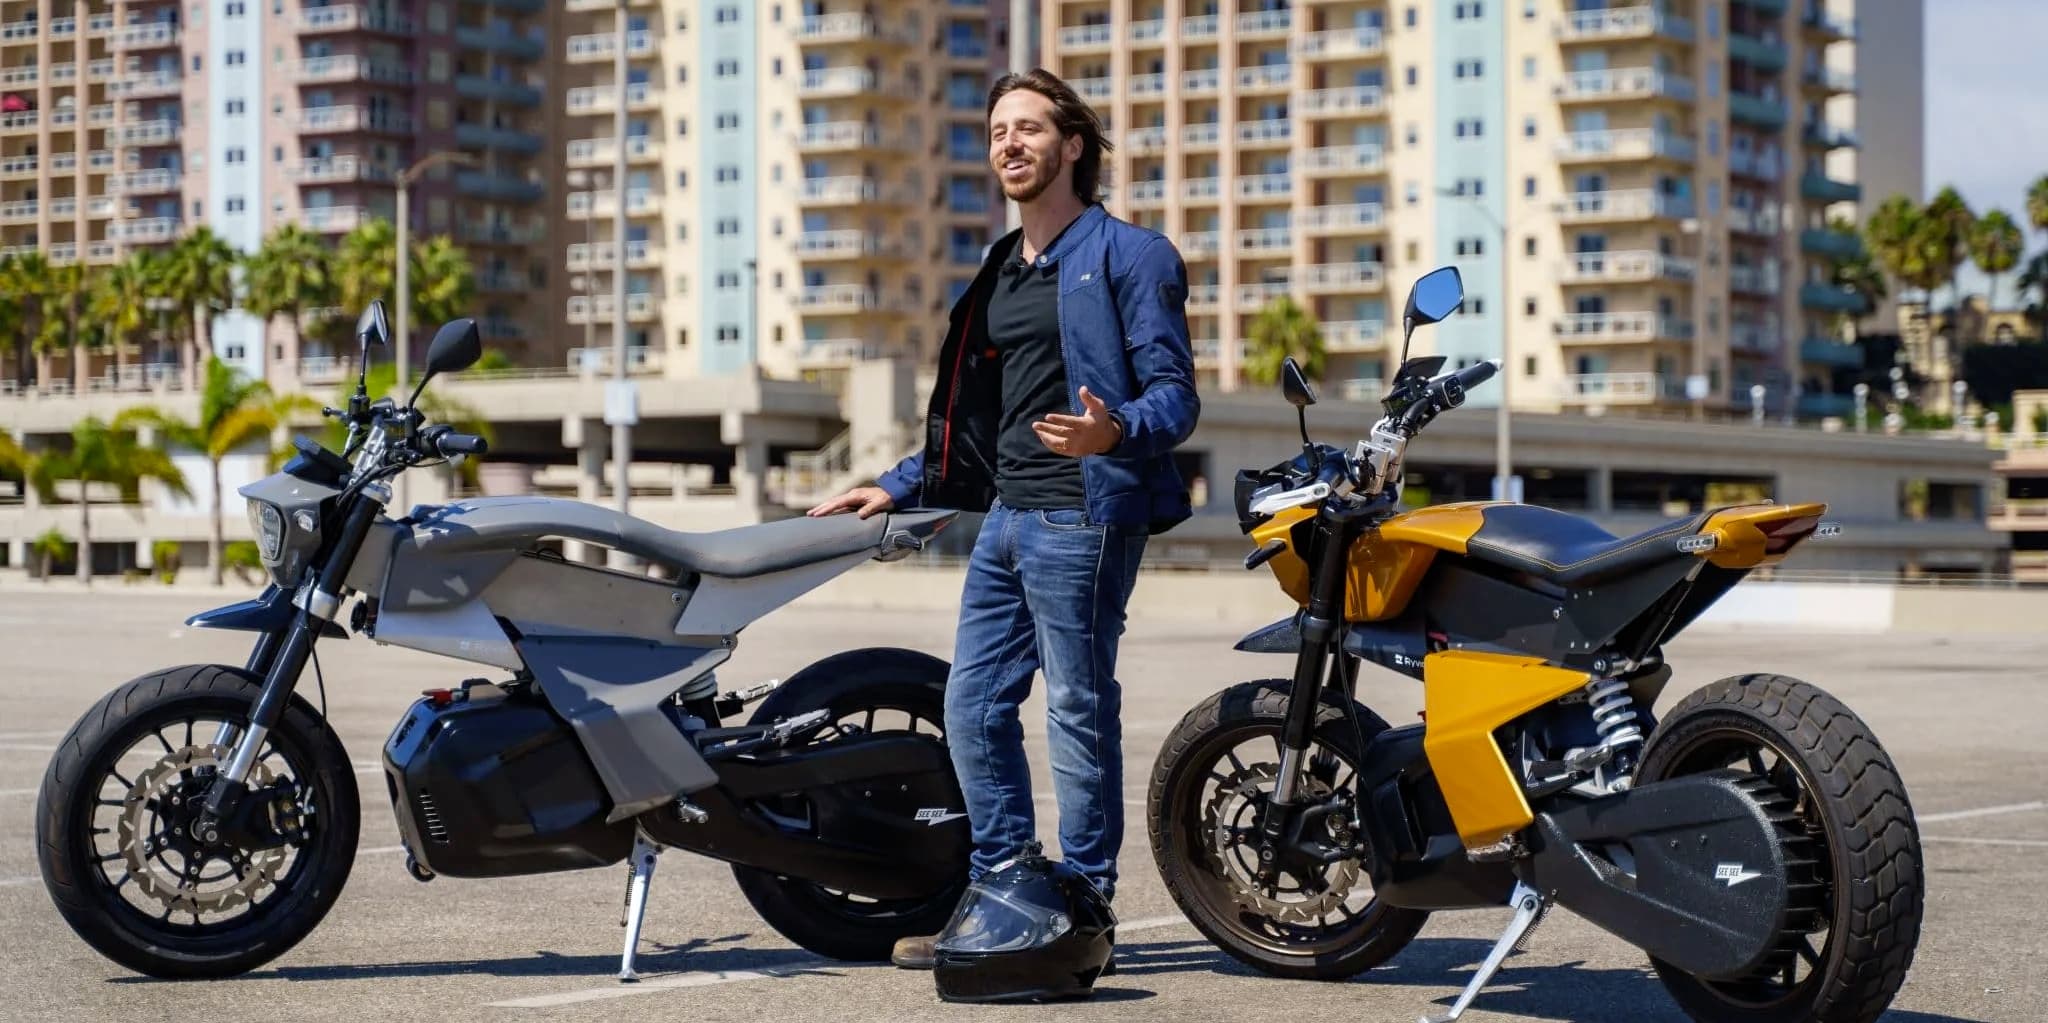 Your first bike should be an electric motorcycle. Here's why